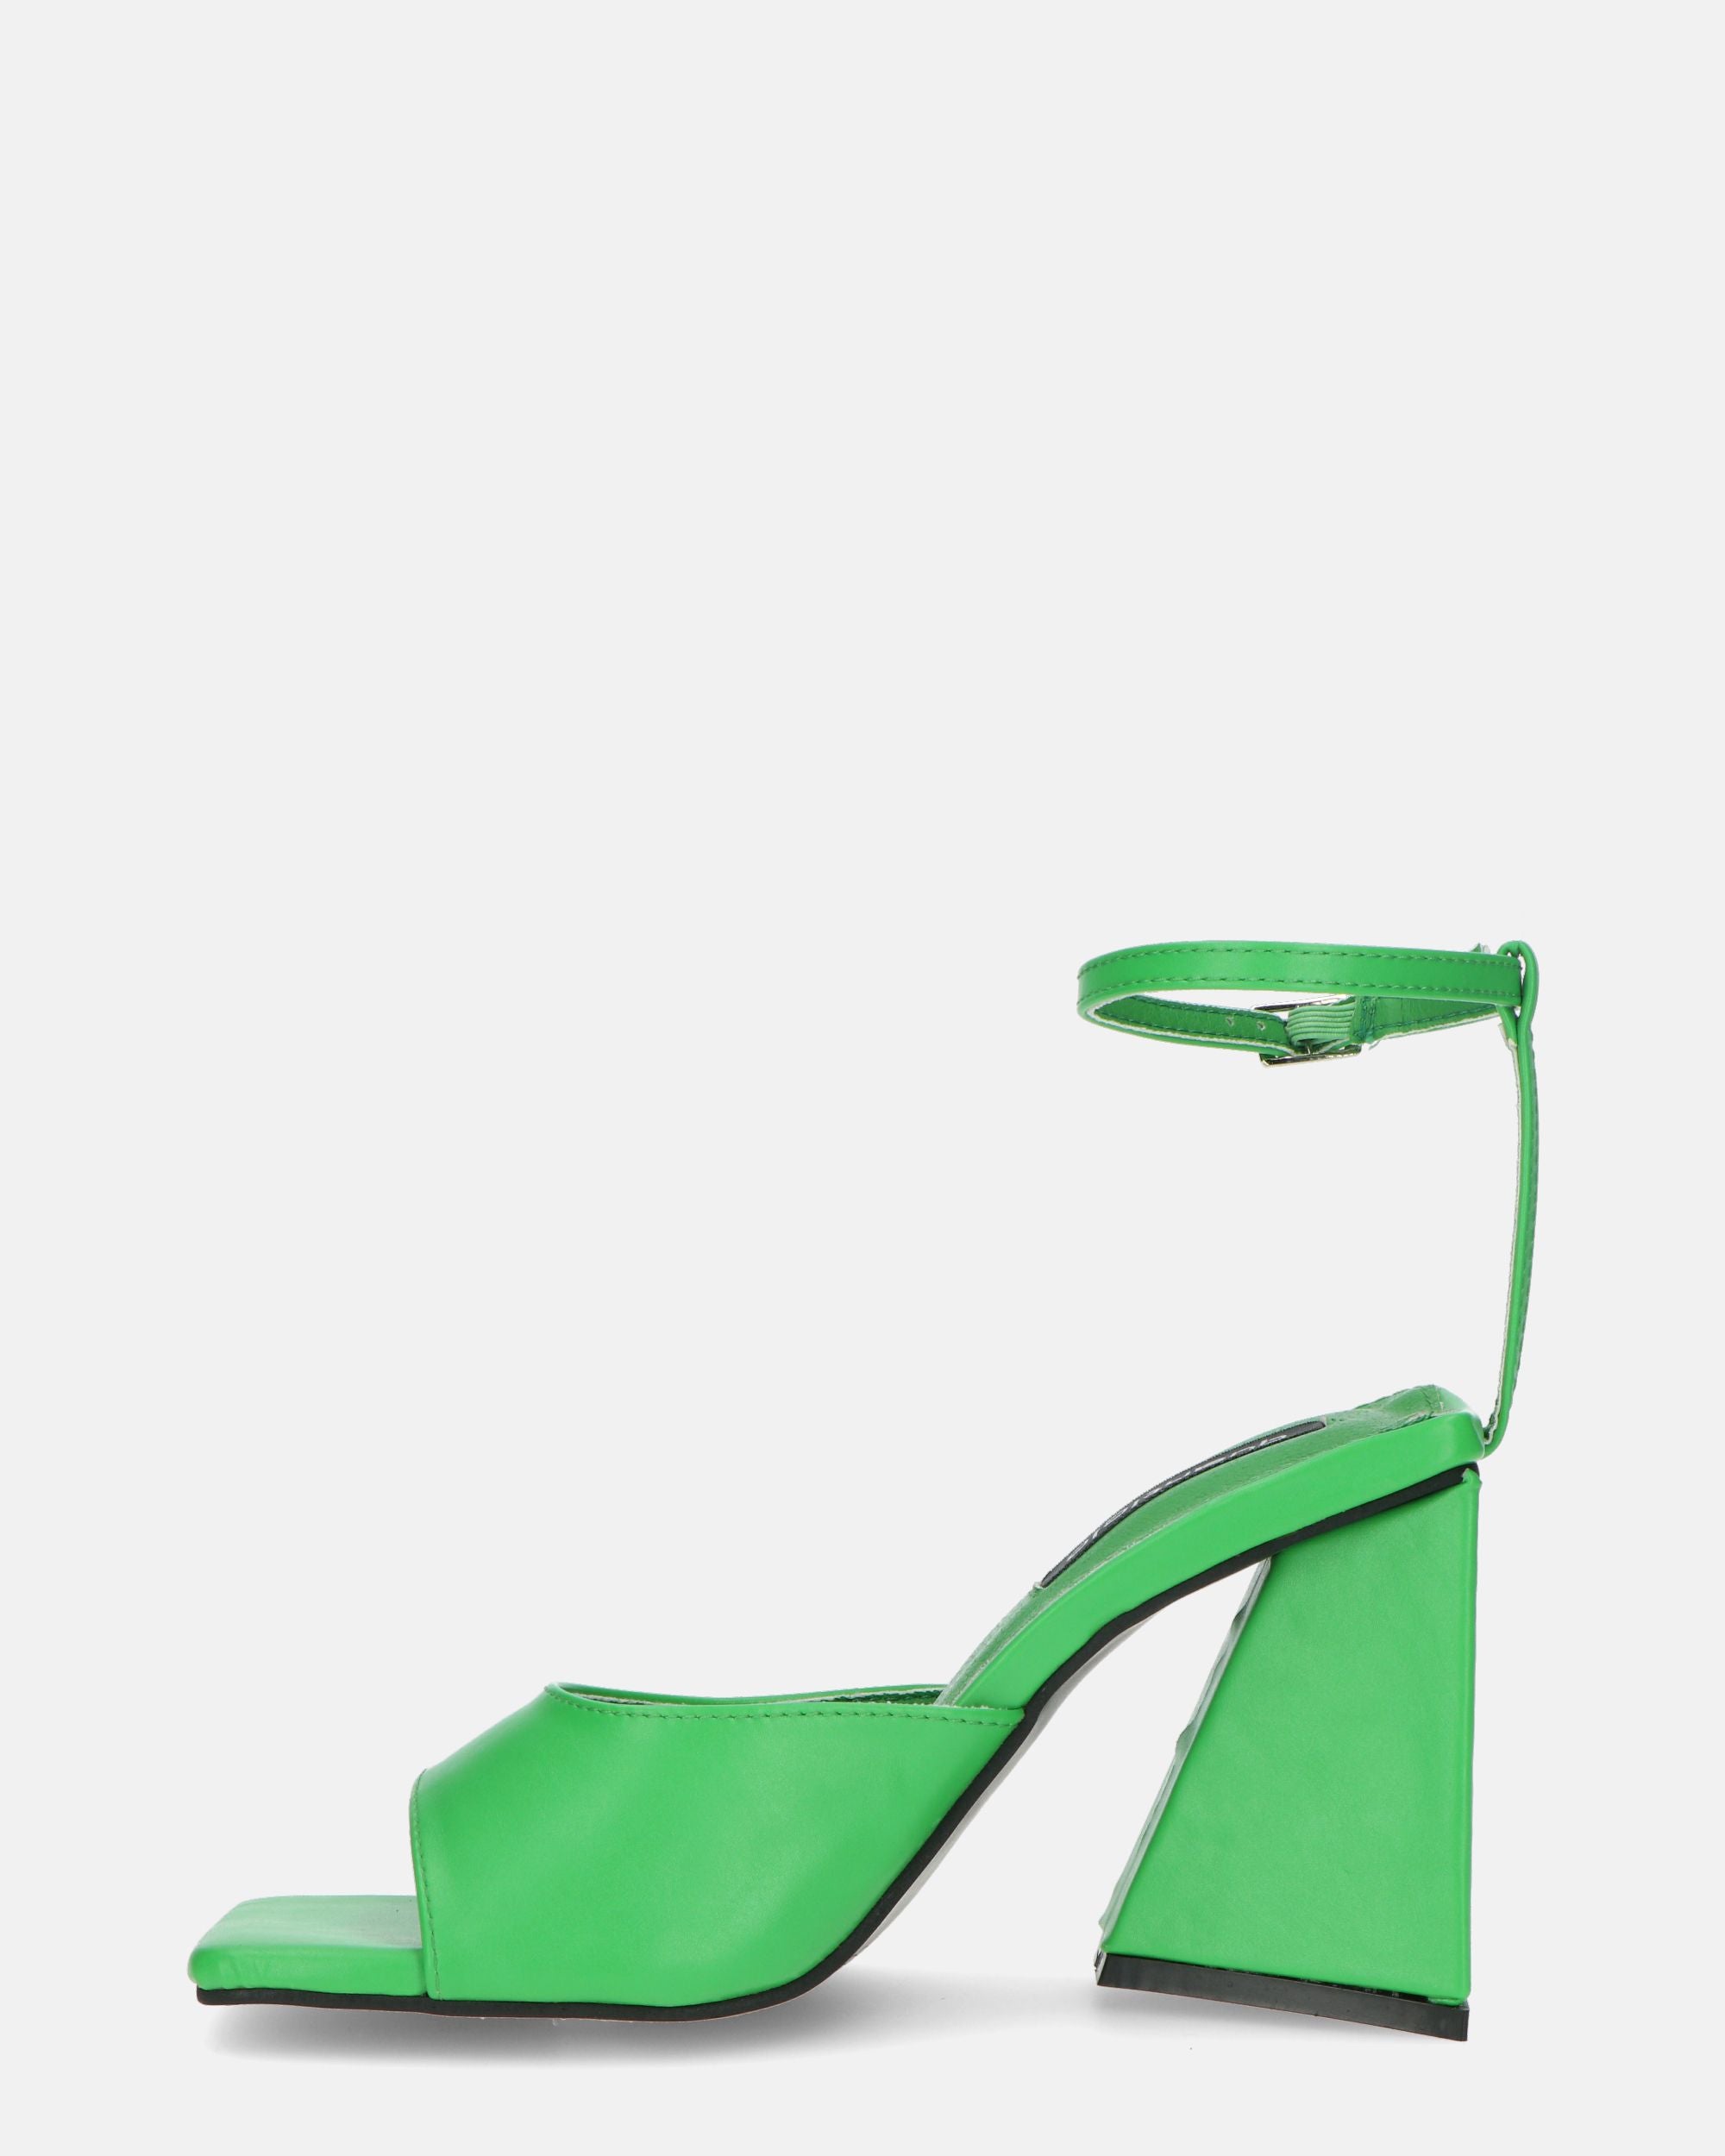 KUBRA - sandals with strap in green PU